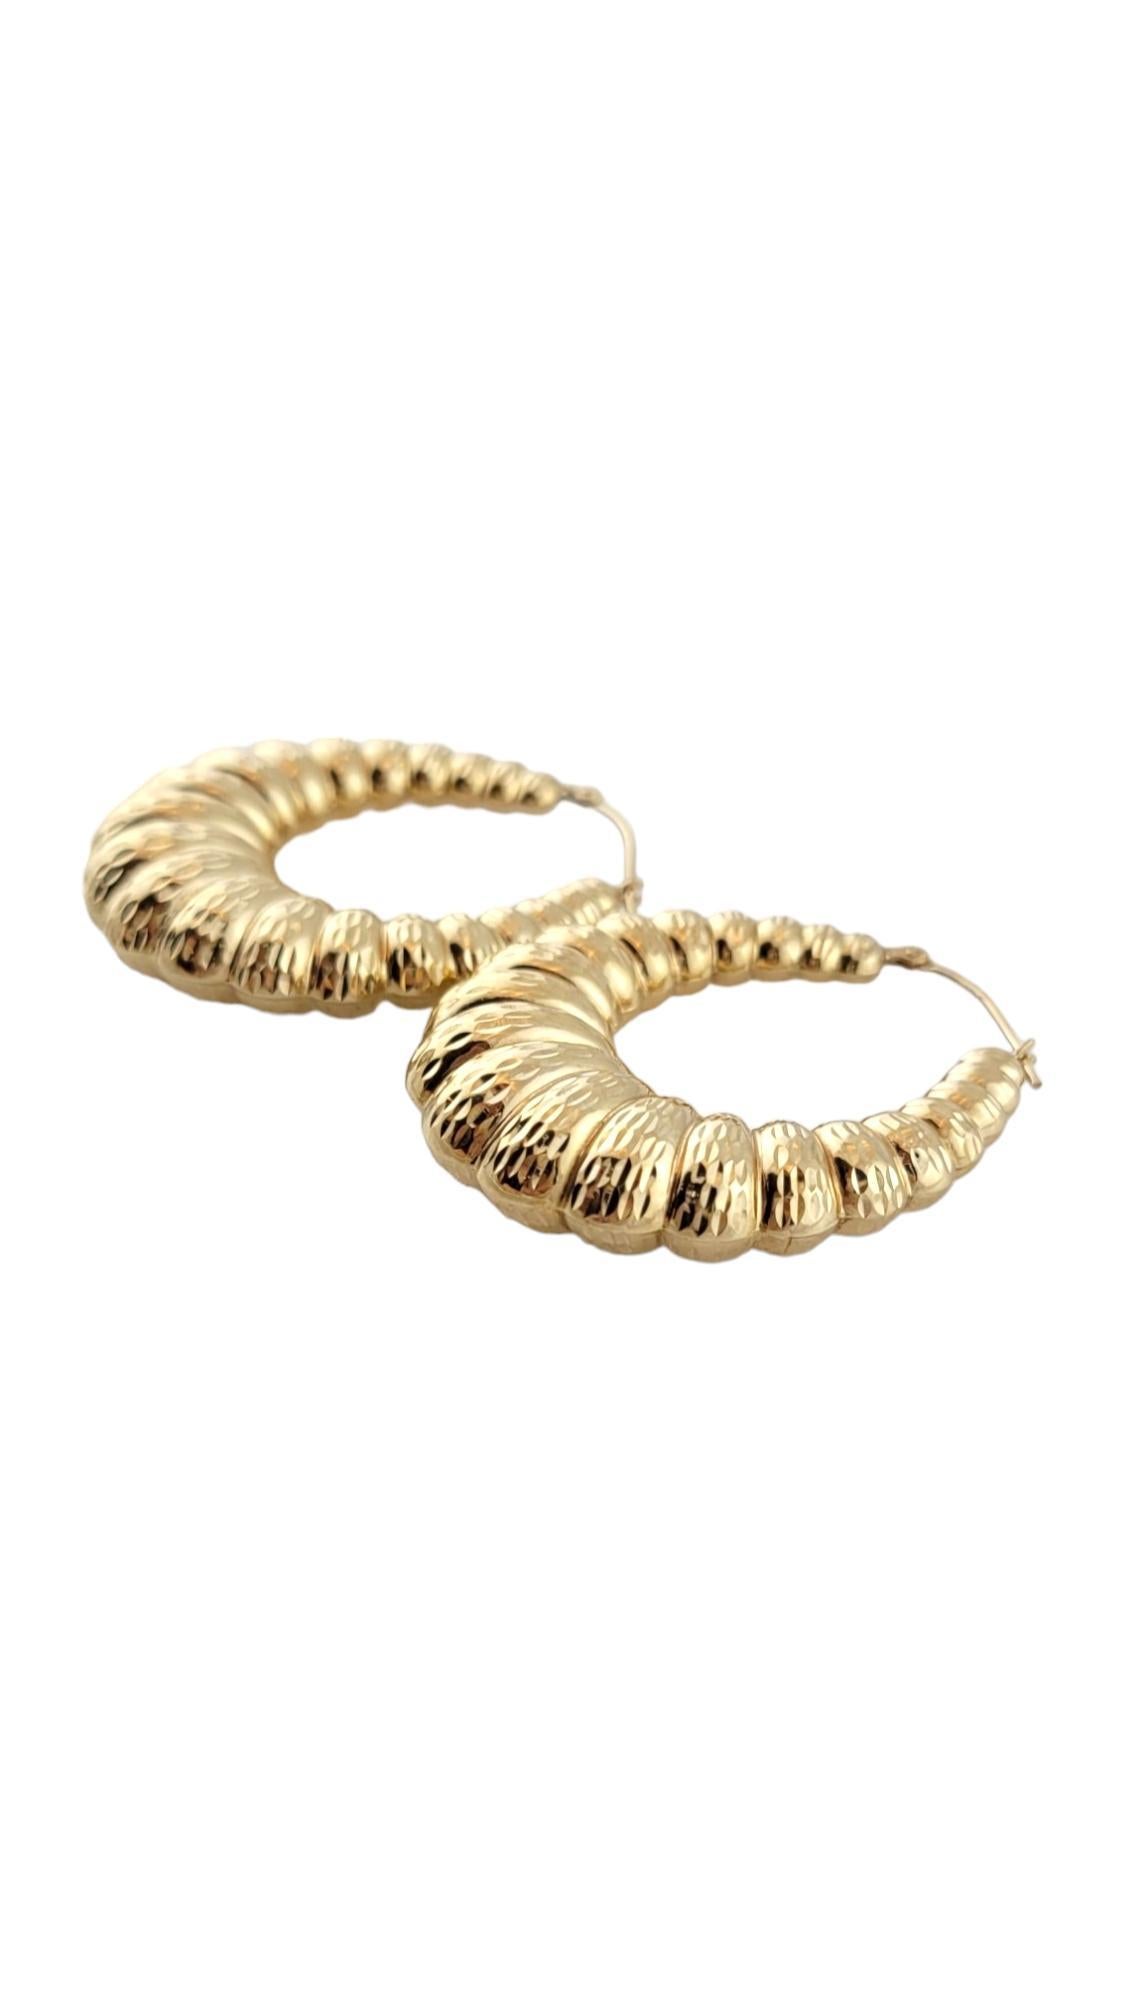 Vintage 14K Yellow Gold Ribbed Oval Hollow Hoops

This gorgeous set of 14K yellow gold, high polish hollow hoops are in a beautiful ribbed oval pattern!

Size: 37.8mm X 32.75mm X 9.05mm
Width at bottom: 13.0mm

Weight: 5.0 g/ 3.2 dwt

Hallmark: